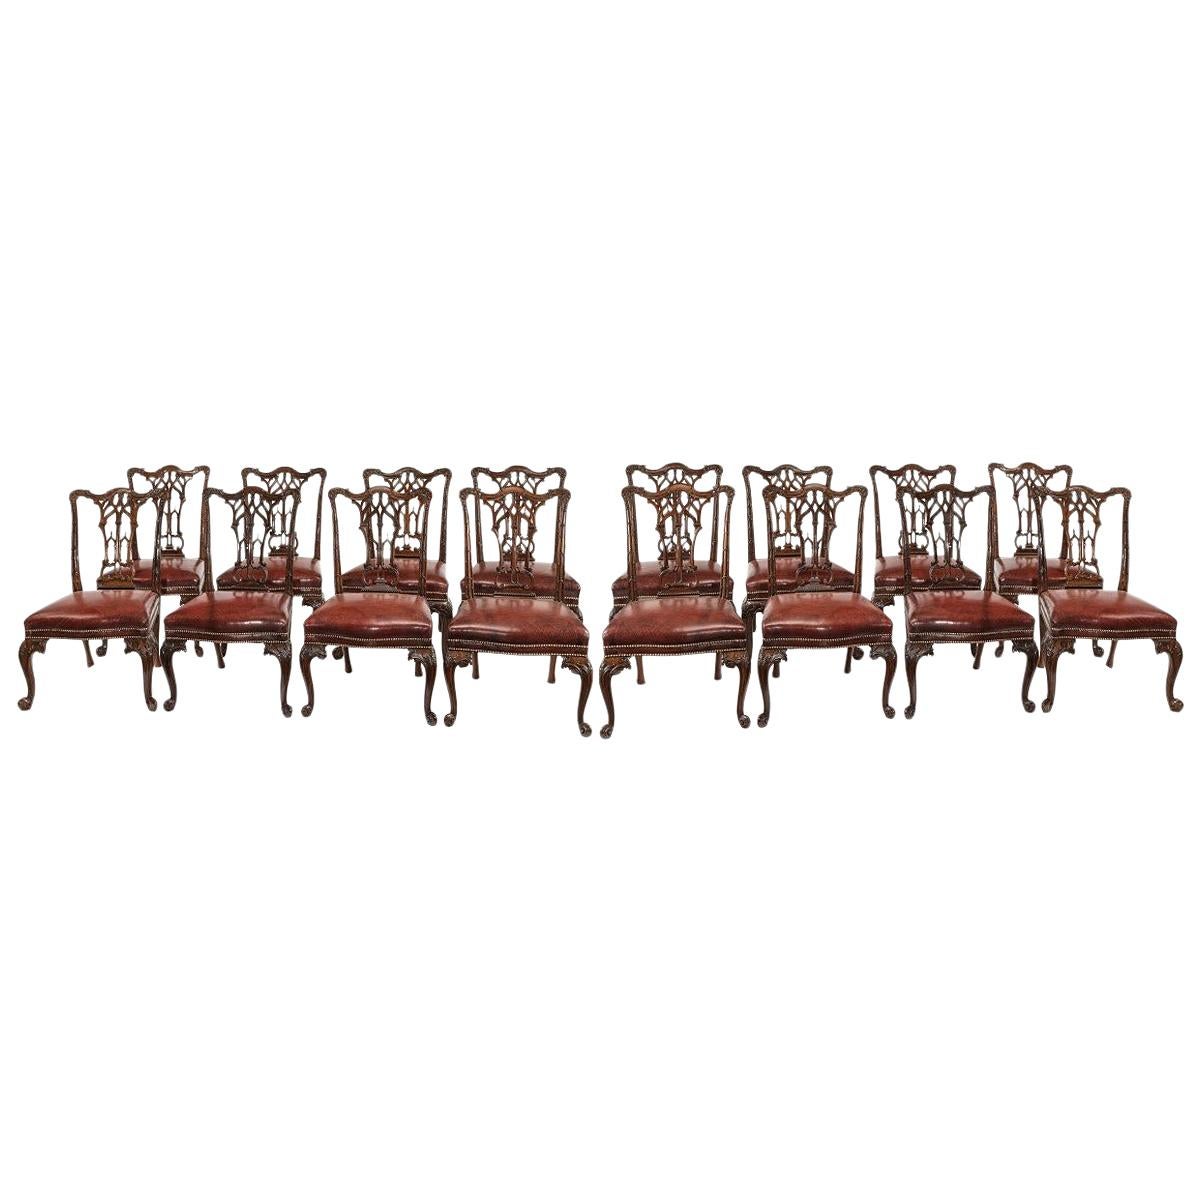 Set of 16 Victorian Mahogany Dining Chairs in the Chippendale Style